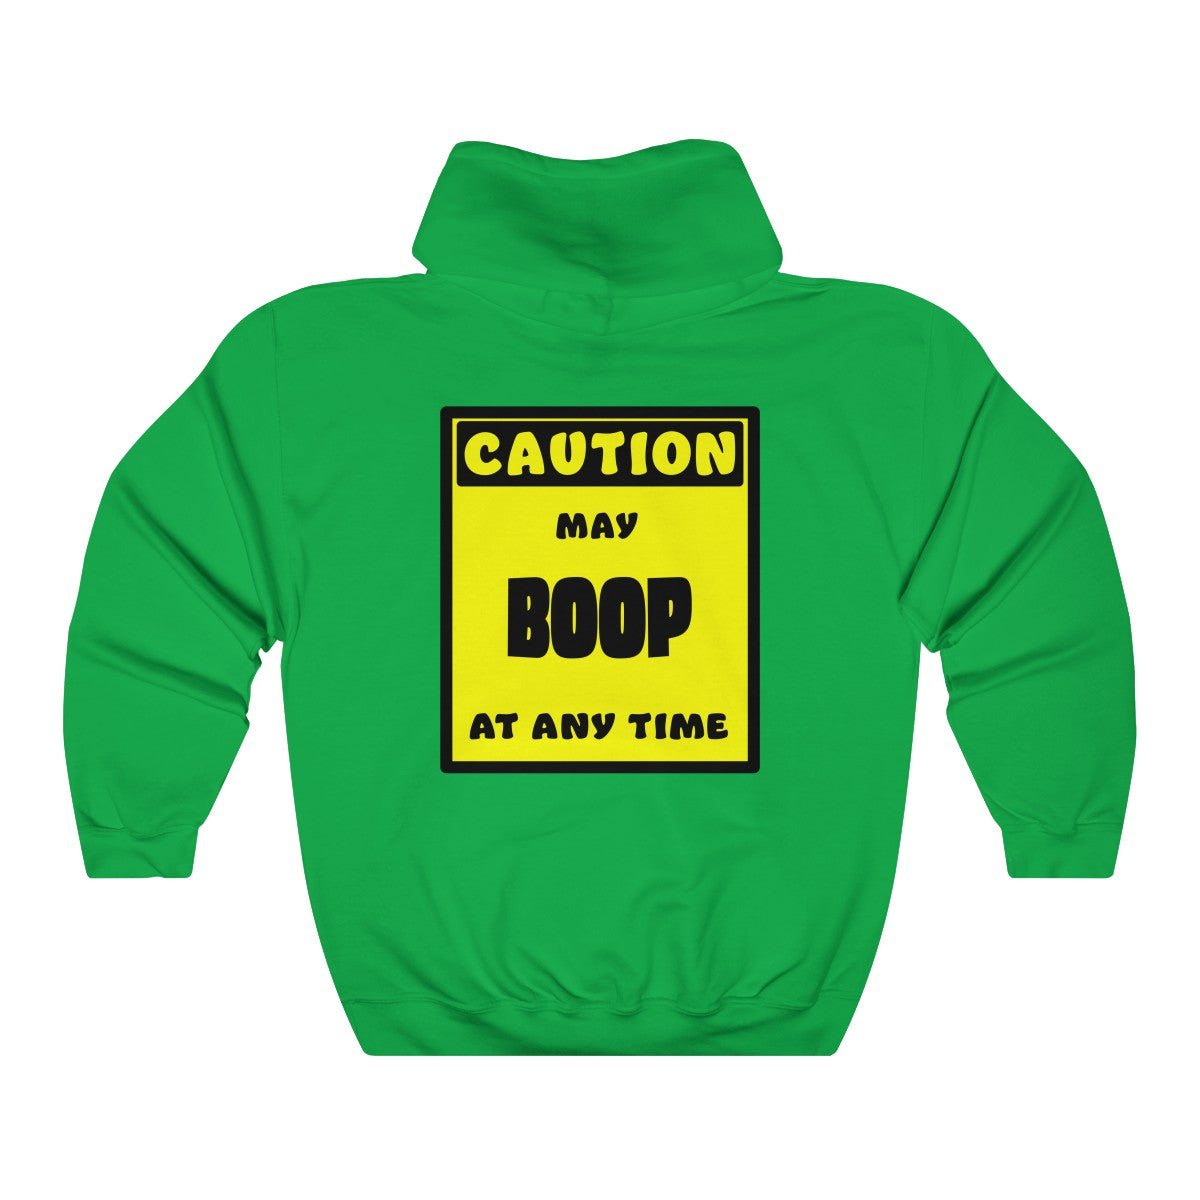 CAUTION! May BOOP at any time! - Hoodie Hoodie AFLT-Whootorca Green S 